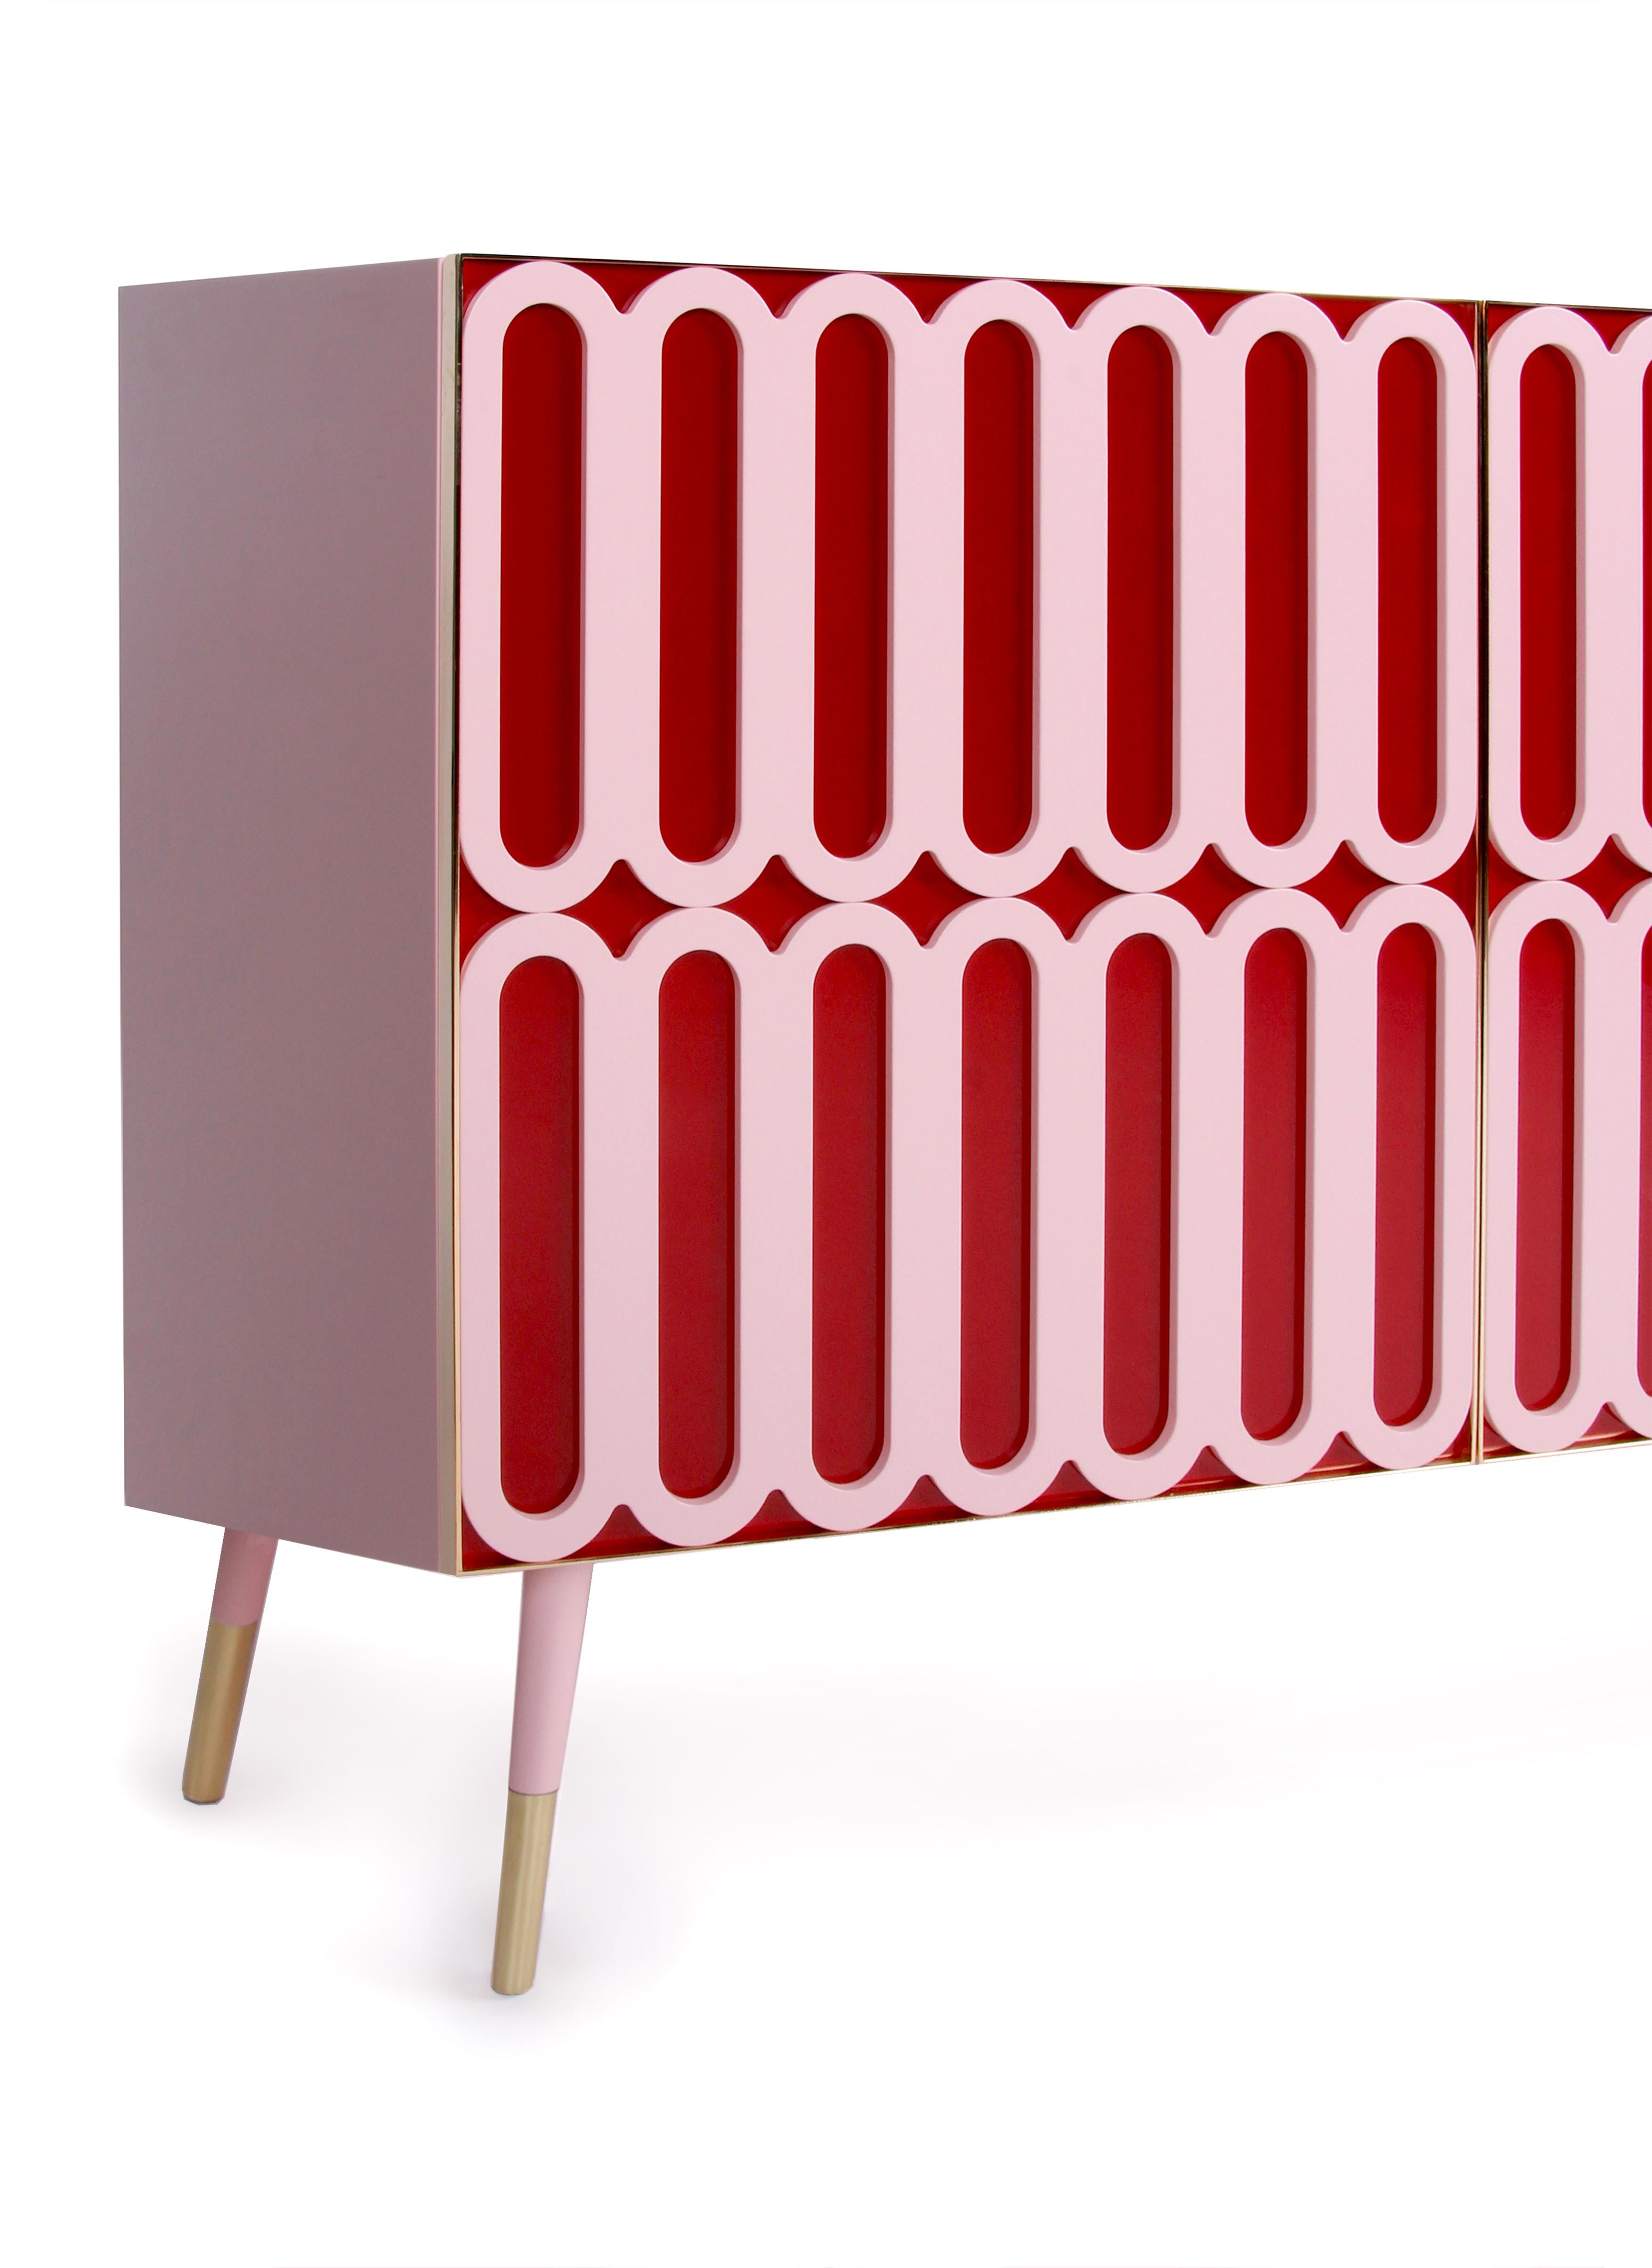 A colorful buffet in pink matte body and a pink matte pattern over a glossy royal red surface, elevated by a brass presence. Handmade by highly skilled European artisans.

Available in stock in Royal red and pink lacquer or can be made to order with